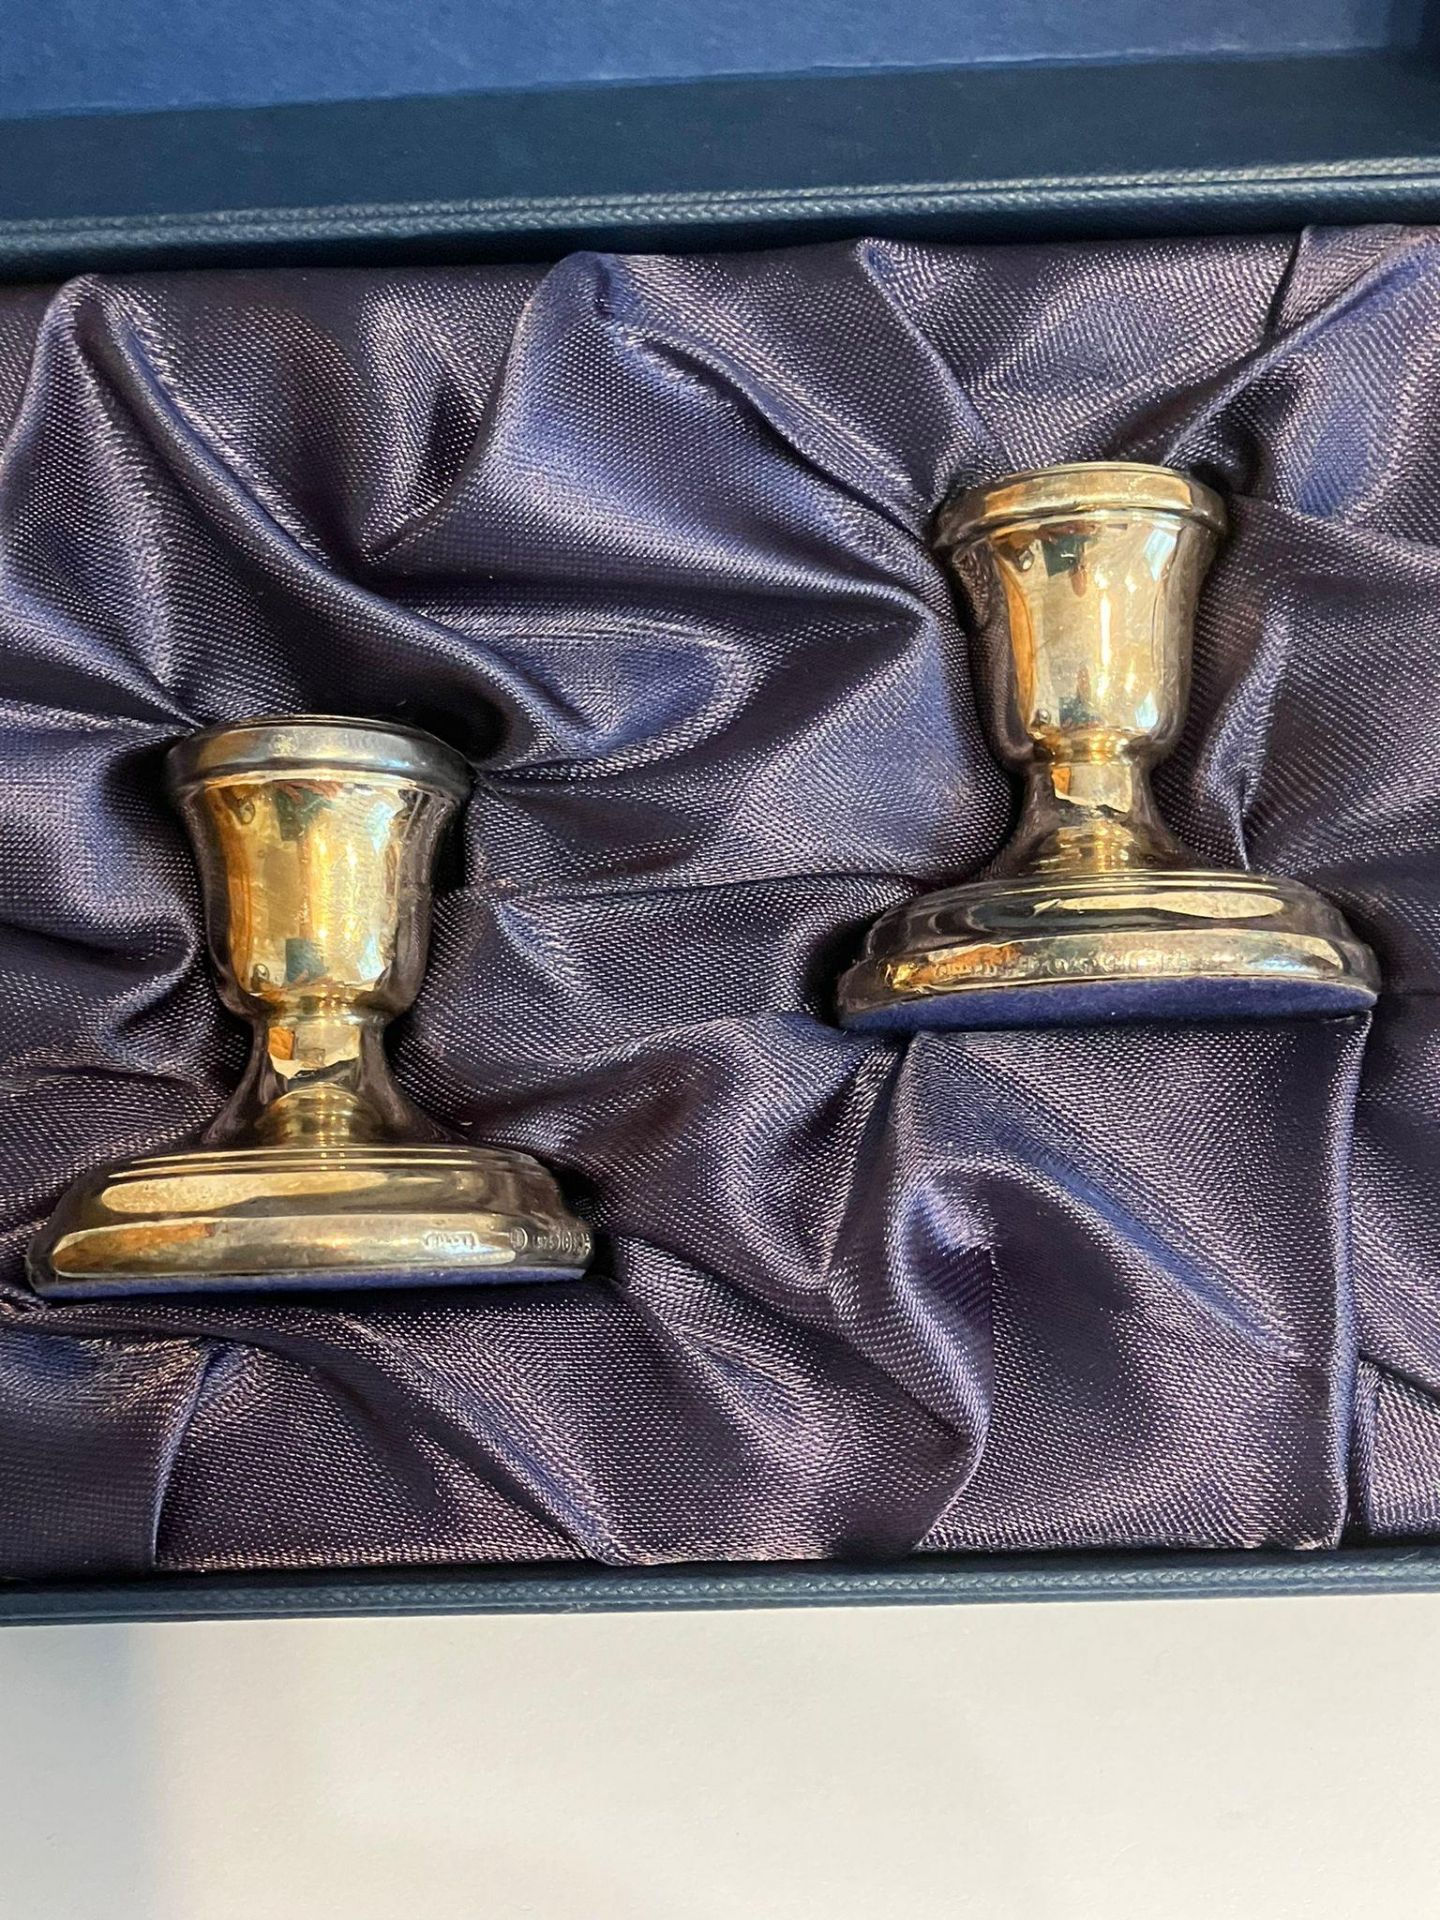 Pair of SILVER CANDLESTICKS in gift box. Condition as new.